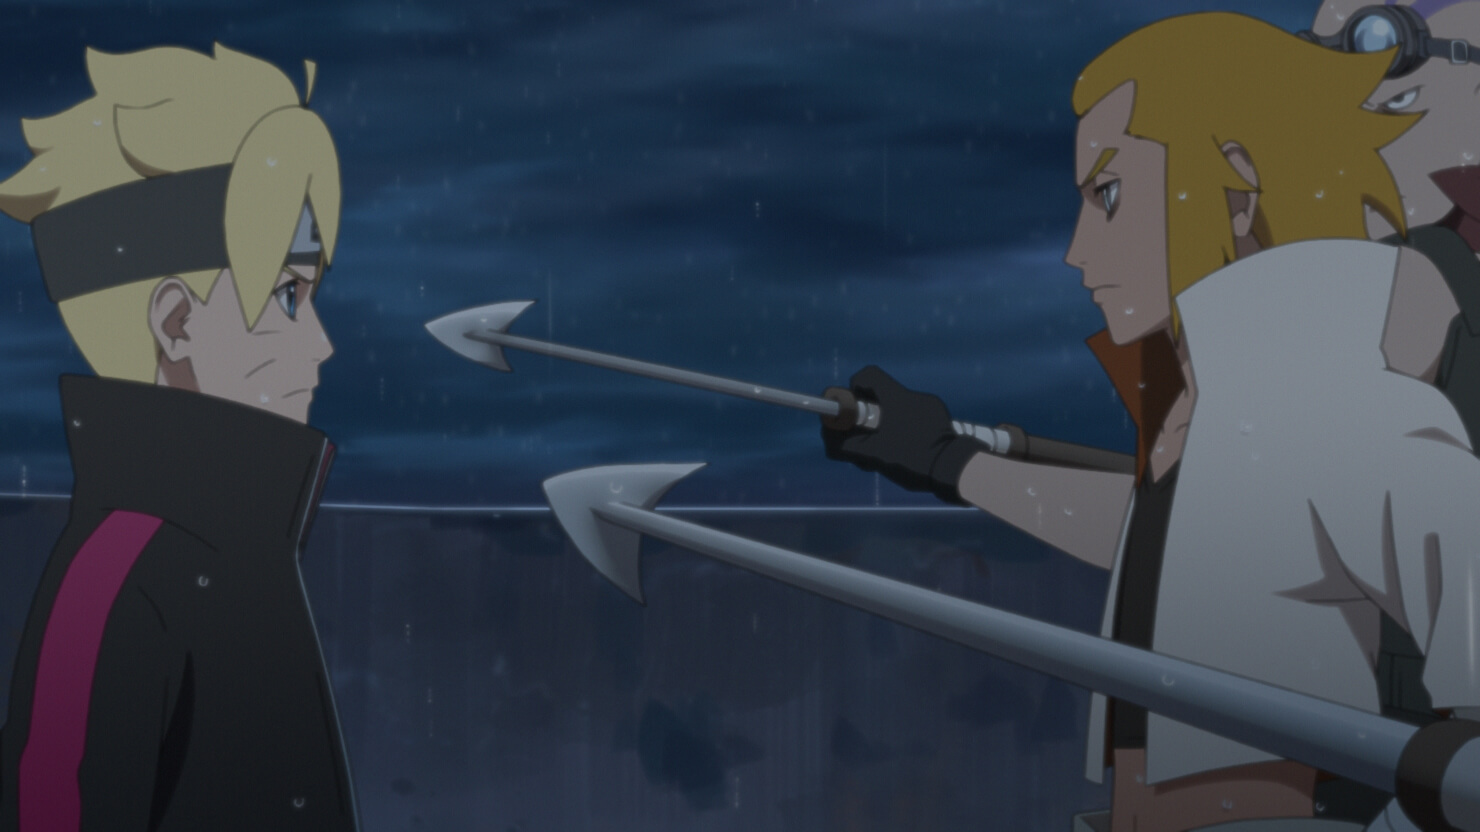 boruto face to face w ikada in the preview for ep 253. those last